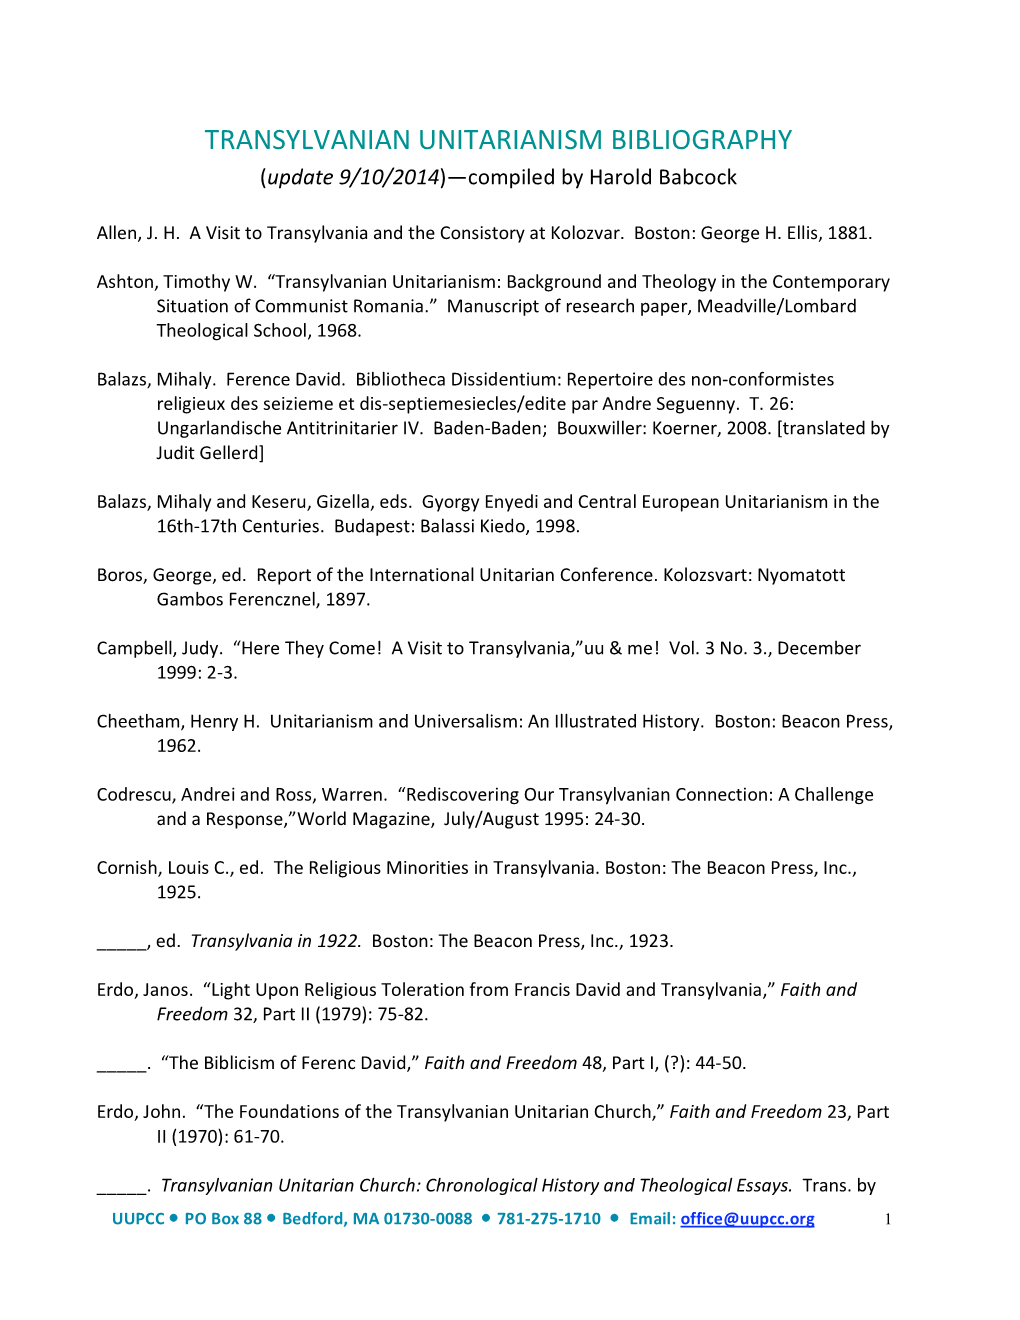 TRANSYLVANIAN UNITARIANISM BIBLIOGRAPHY (Update 9/10/2014)—Compiled by Harold Babcock